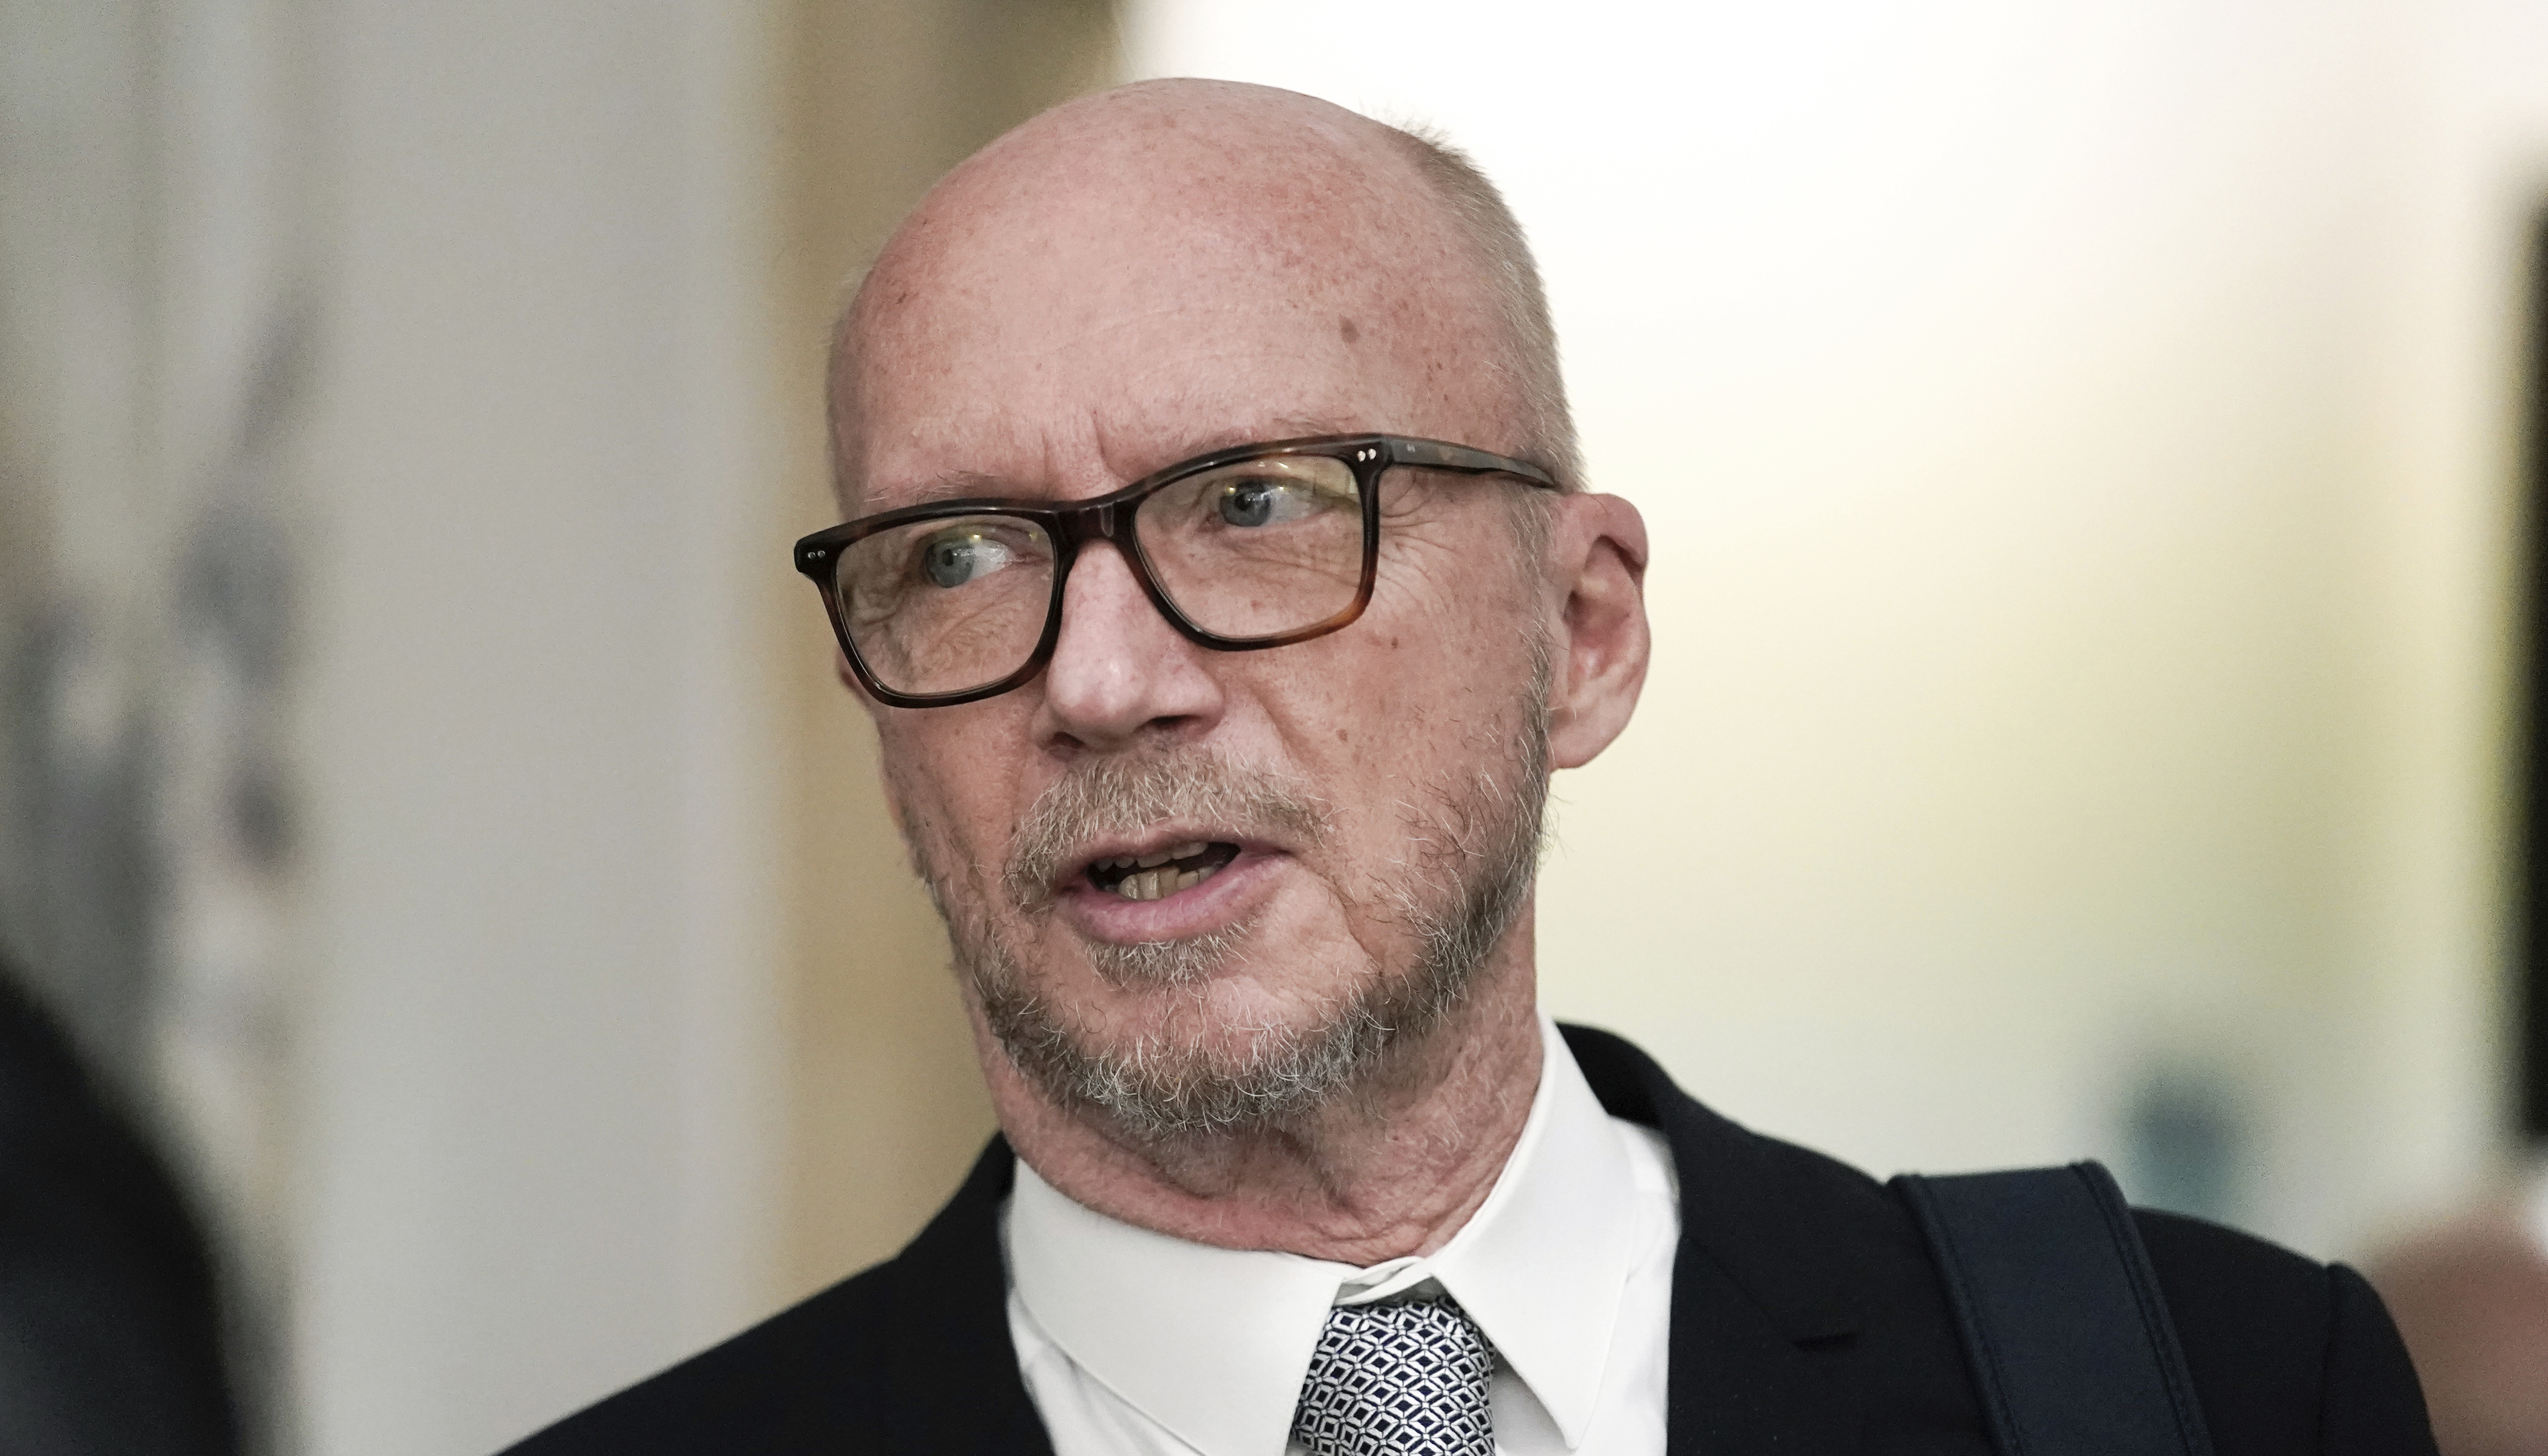 Filmmaker Paul Haggis says he never forced himself on publicist pic photo